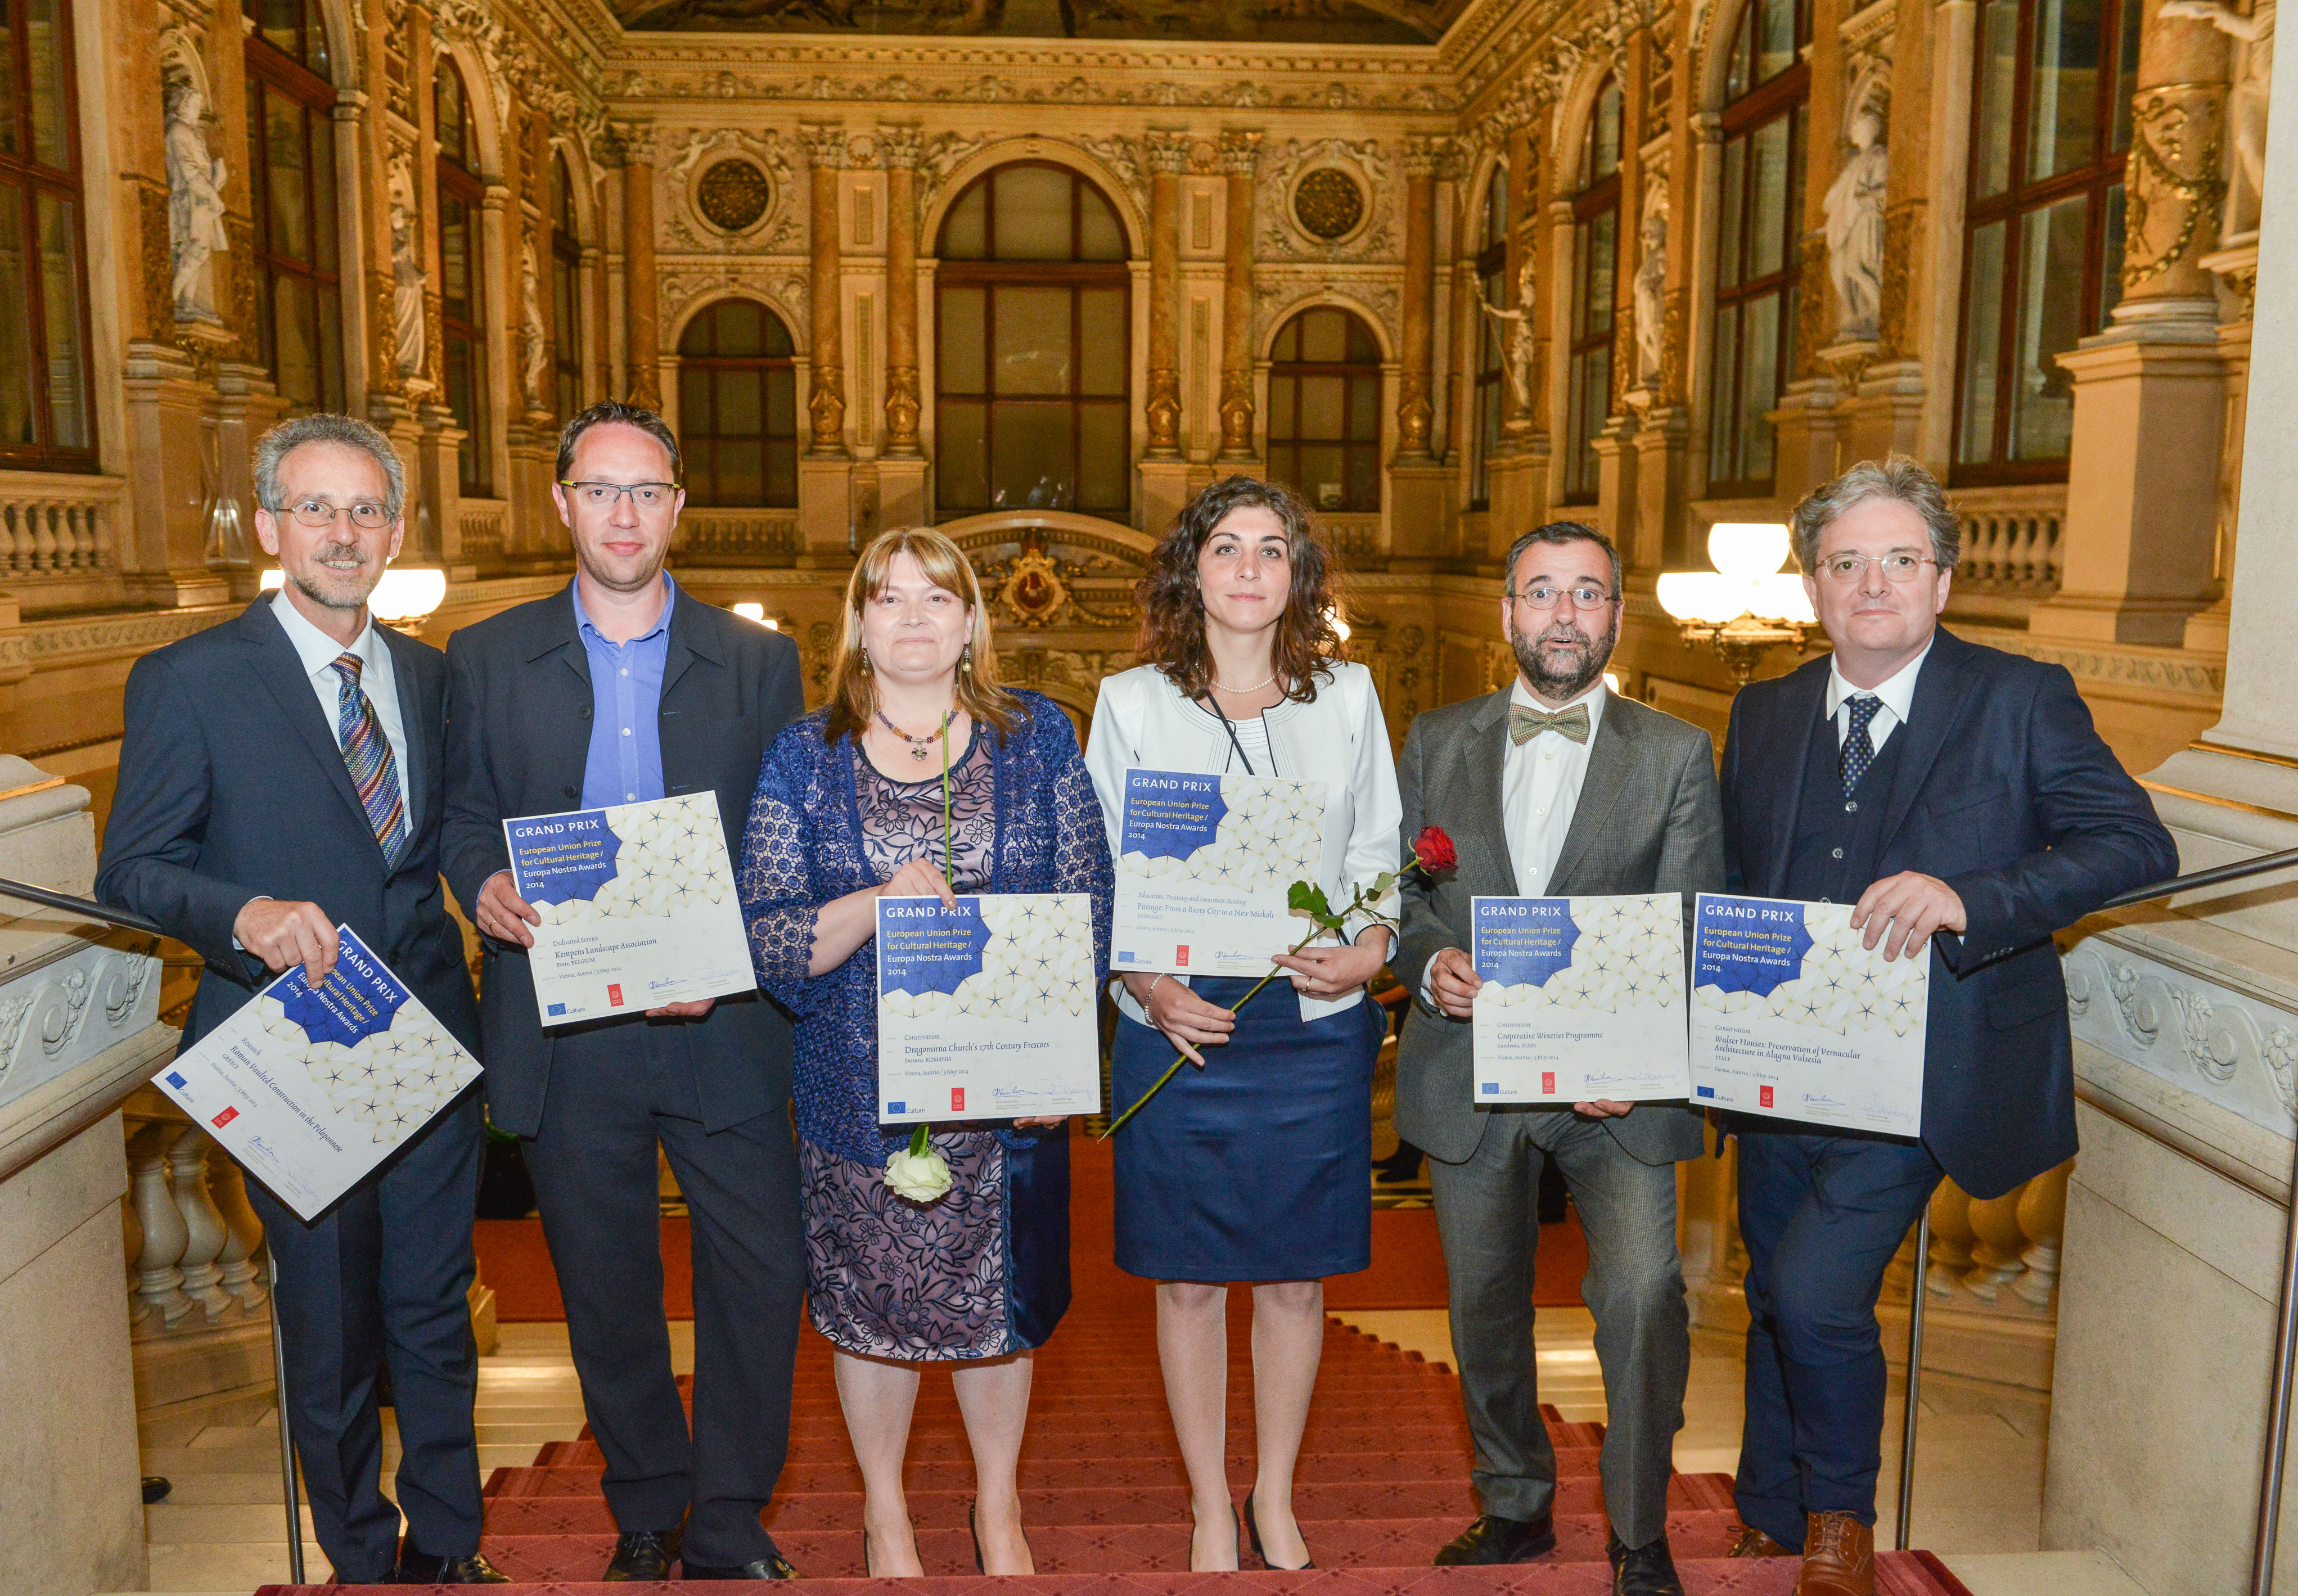 The six Grand Prix winners of the 2014 EU Prize for Cultural Heritage / Europa Nostra Awards after ceremony at the Burgtheater. From the left to the right, award-winning projects from Greece, Belgium, Romania, Hungary, Spain and Italy. Photo: Oreste Schaller.